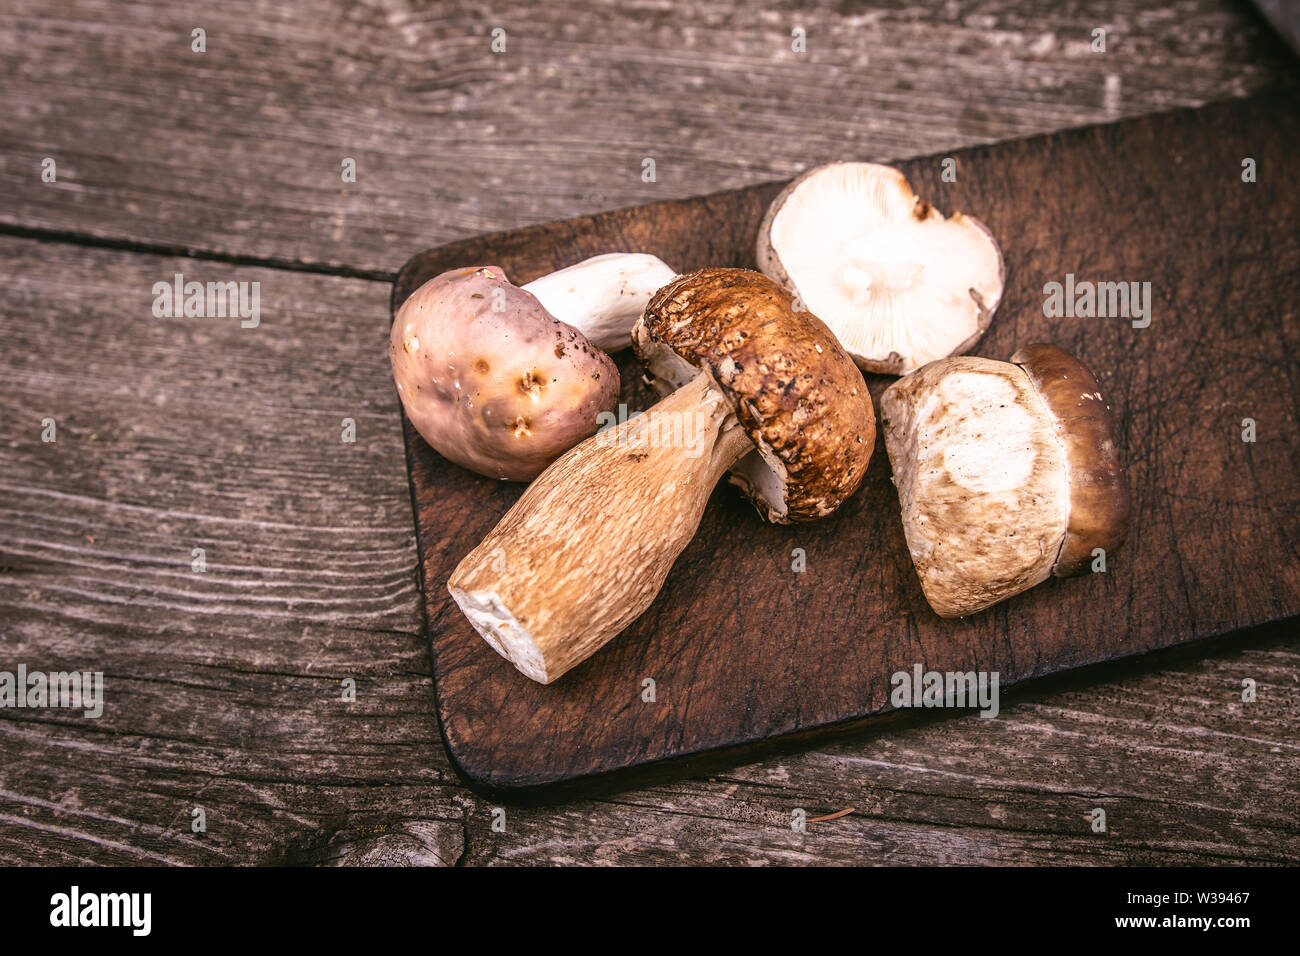 Delicious Types of Edible Brown Wild Mushrooms on Wooden Plank Background. Nature and Healthy Food Concept. Stock Photo